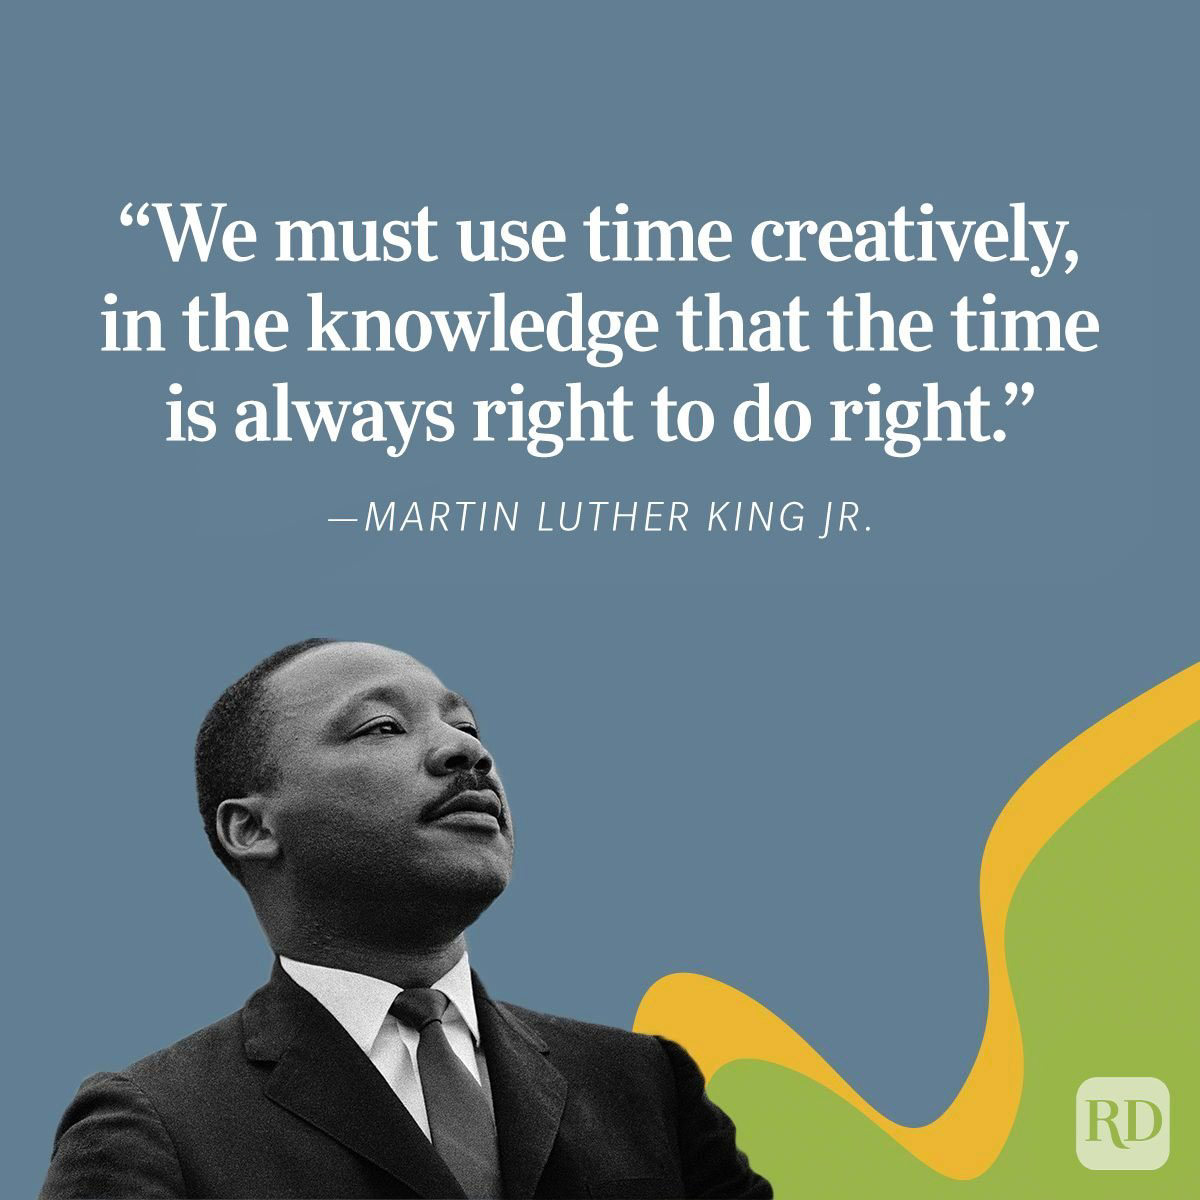 55 Powerful Martin Luther King Jr. Quotes That Stand the Test of Time